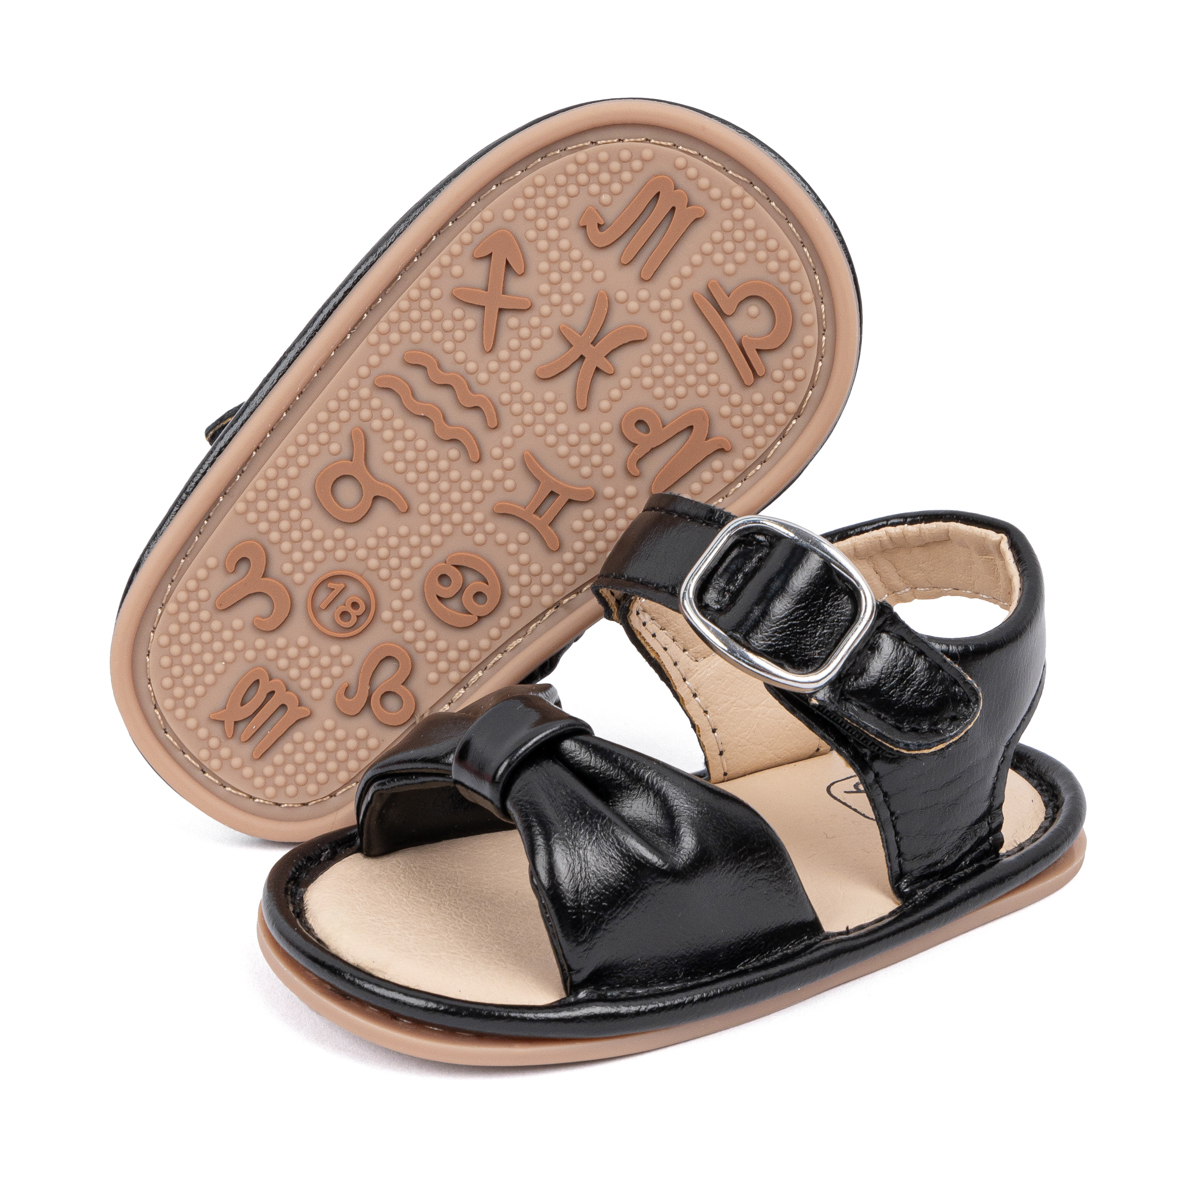 PU Leather Twisted Bow Summer Baby Sandals